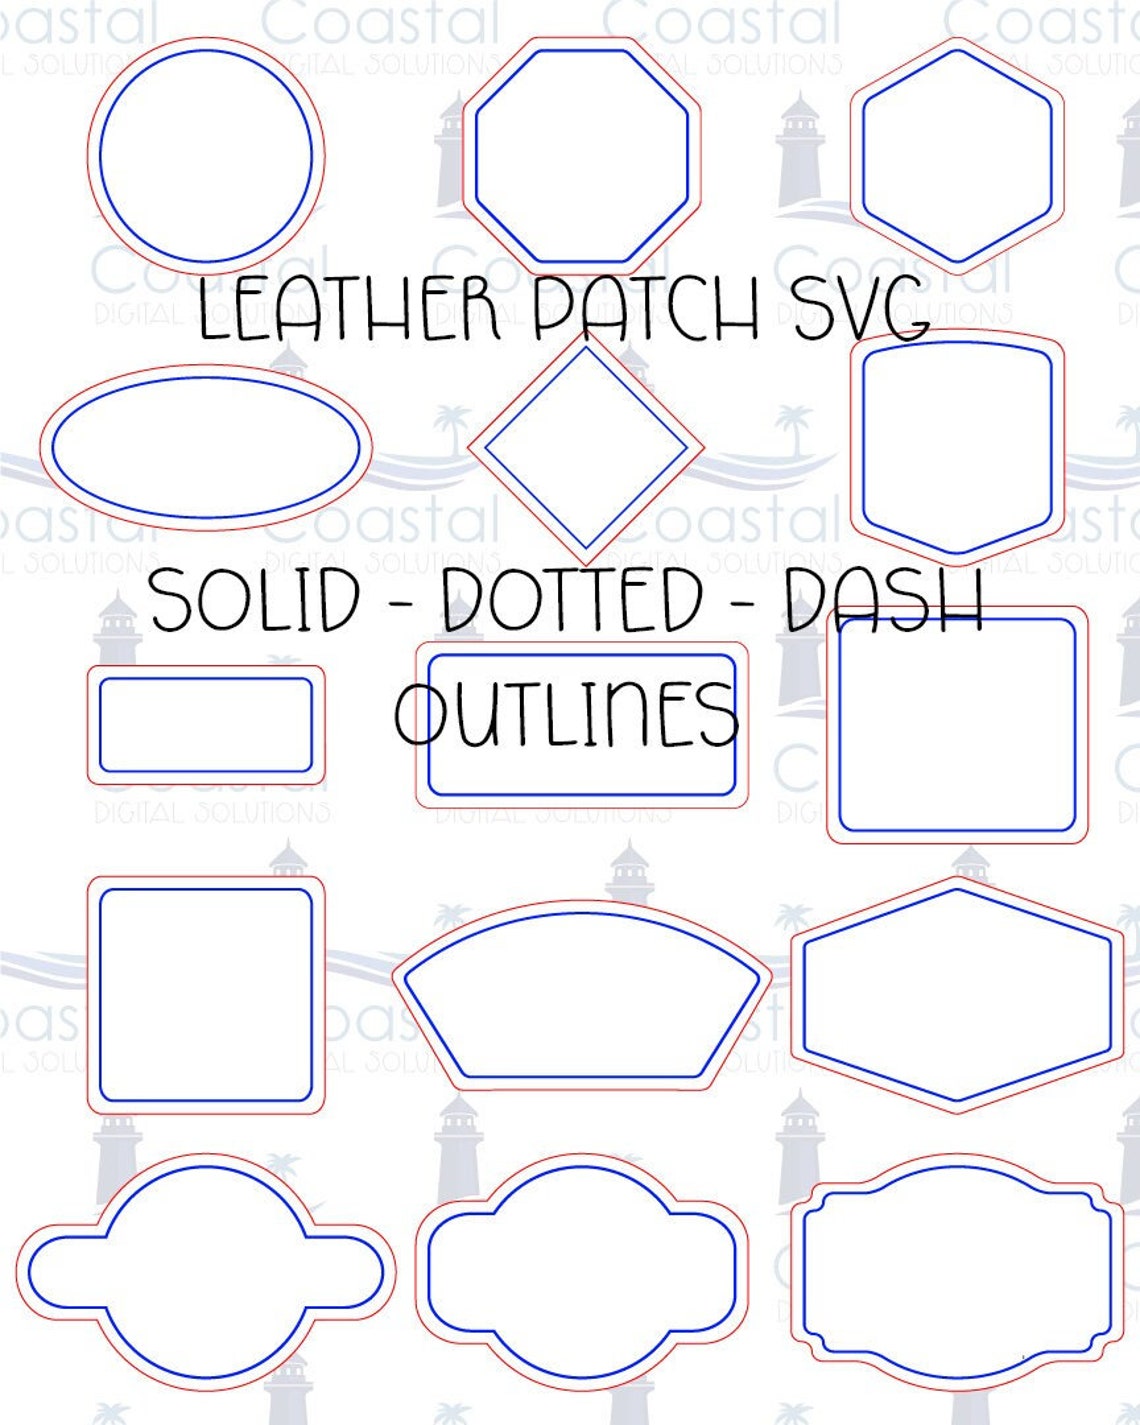 45 Hat Patches Leather Patch SVG Leather Patch Borders - Etsy